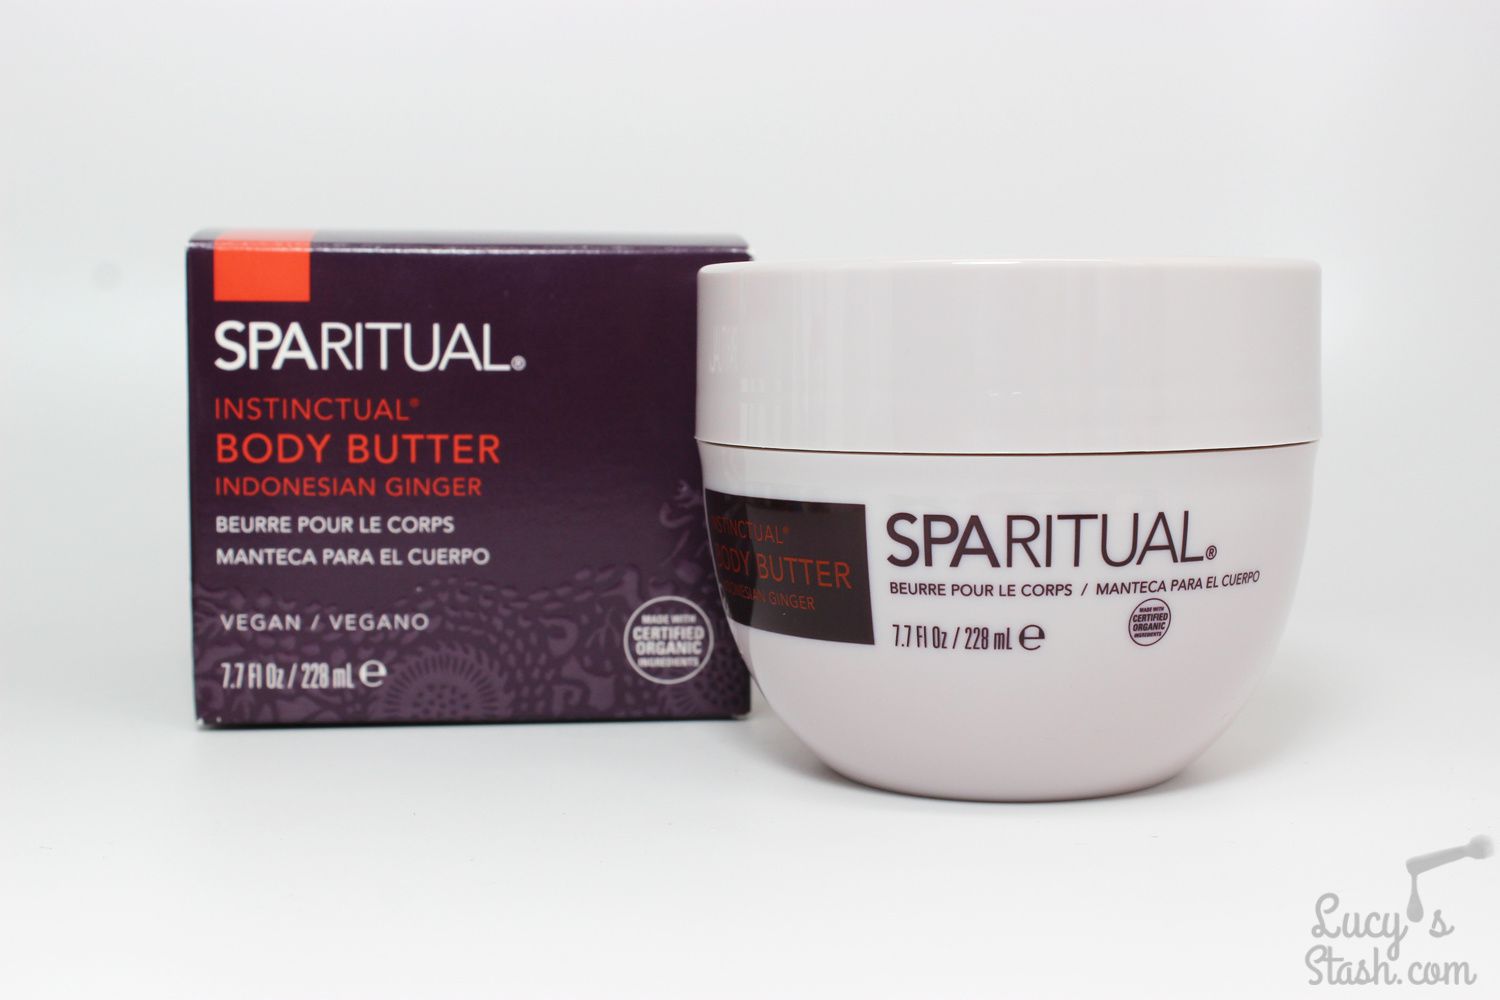 Report: Pedicure at SpaRitual Salon in Brno (...and yes, there are feet! ;) + SpaRitual Body Butter Review